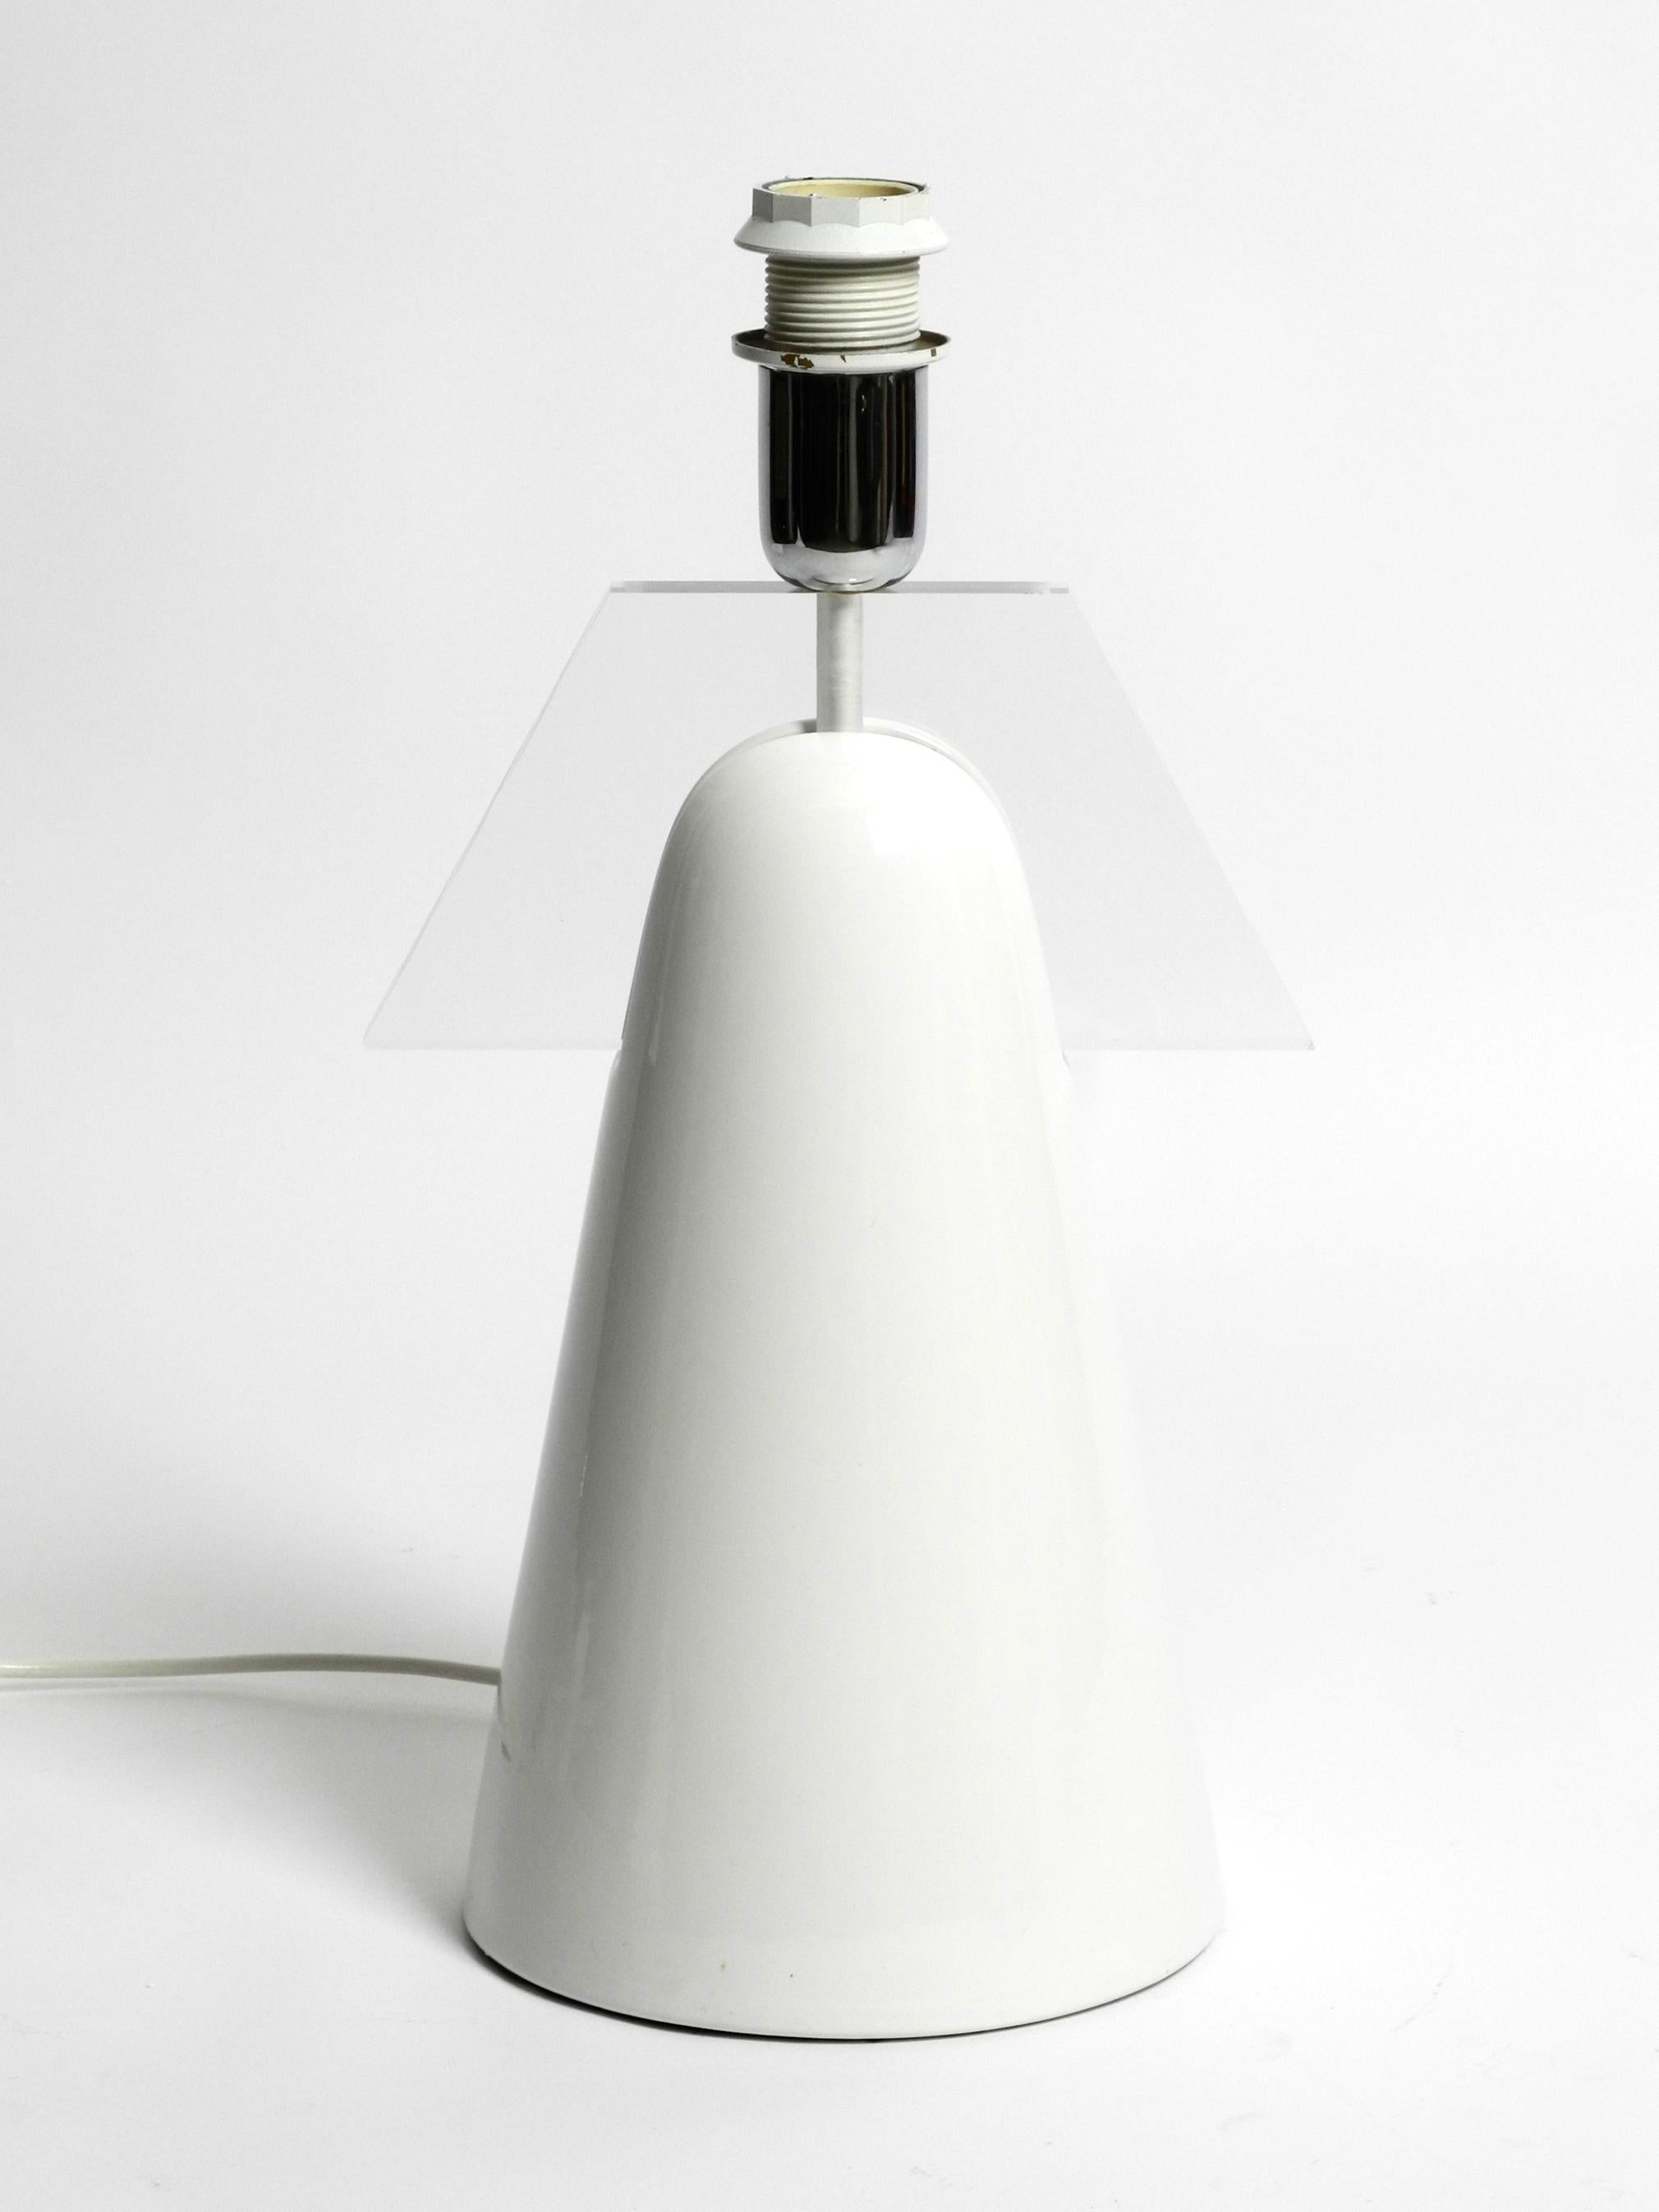 Space Age Stunning Italian 1970s Ceramic Plexiglass Table Lamp Without a Shade For Sale